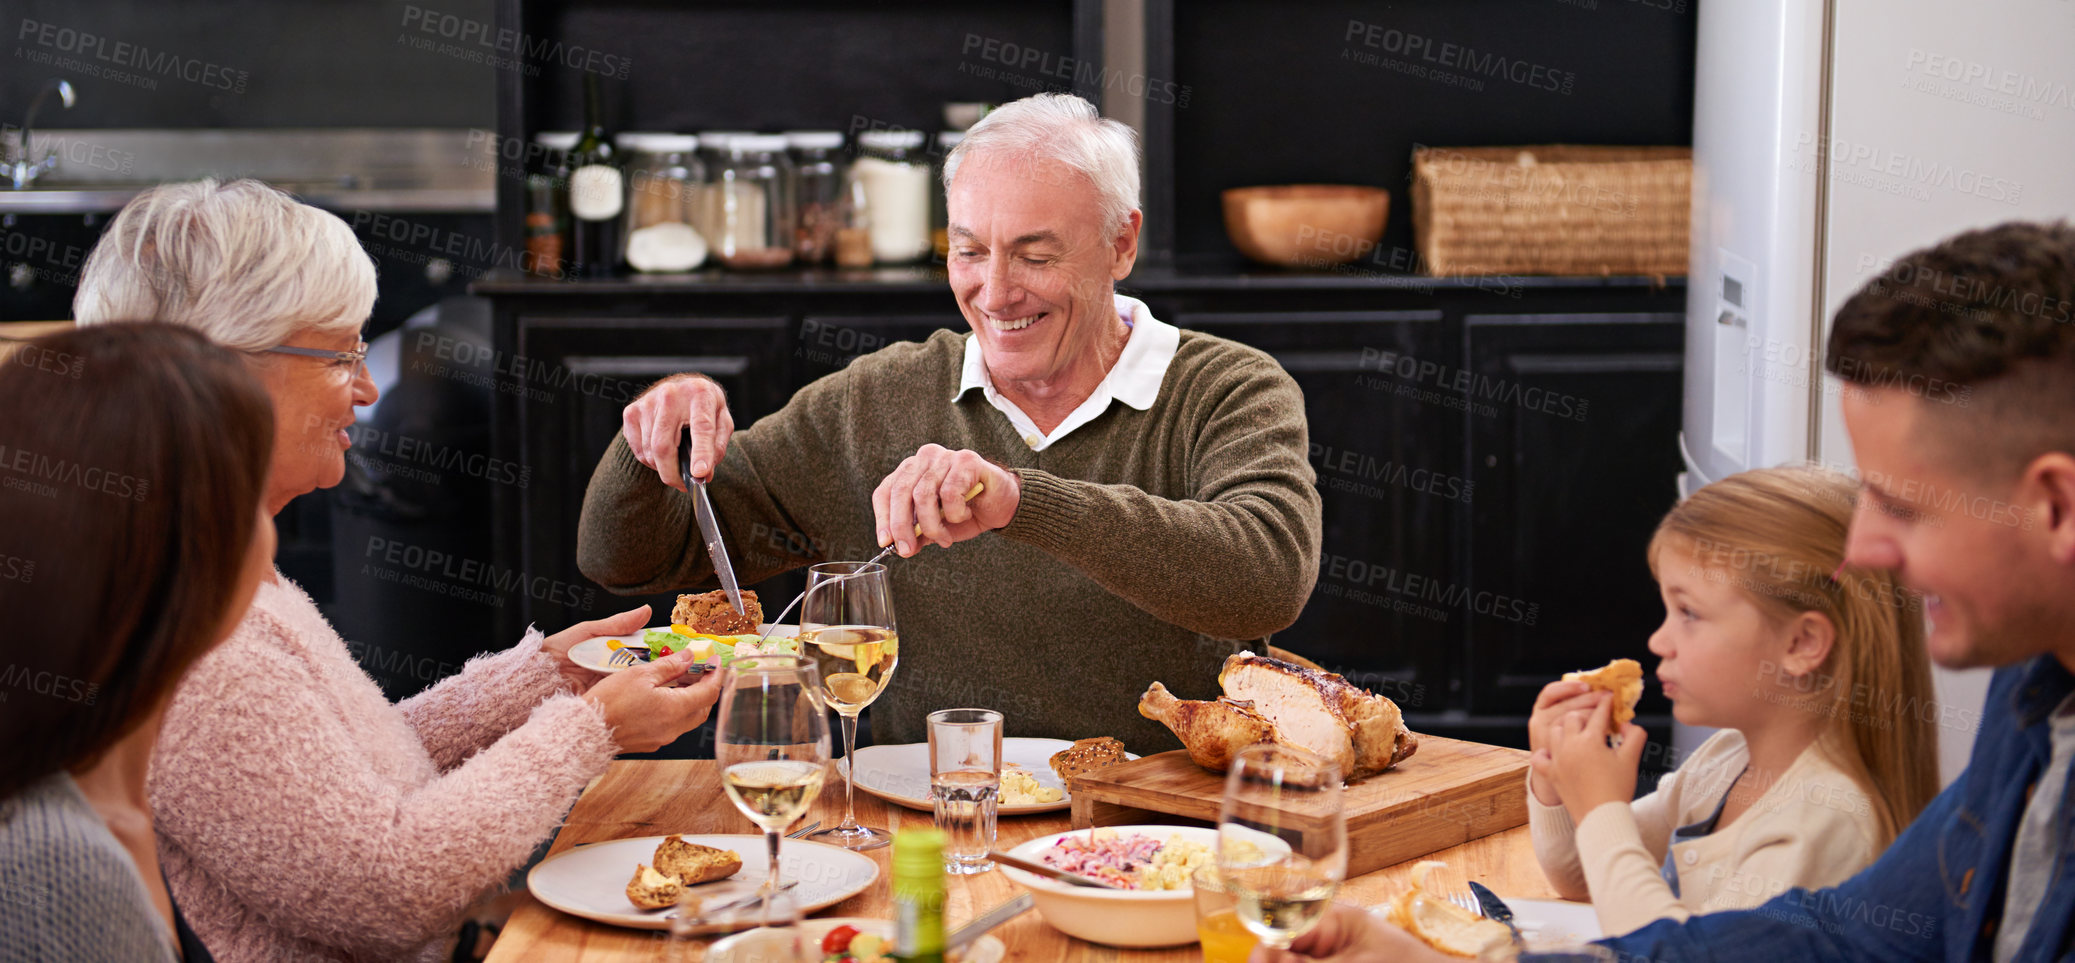 Buy stock photo Cropped shot of a family sharing a meal around the dinner table